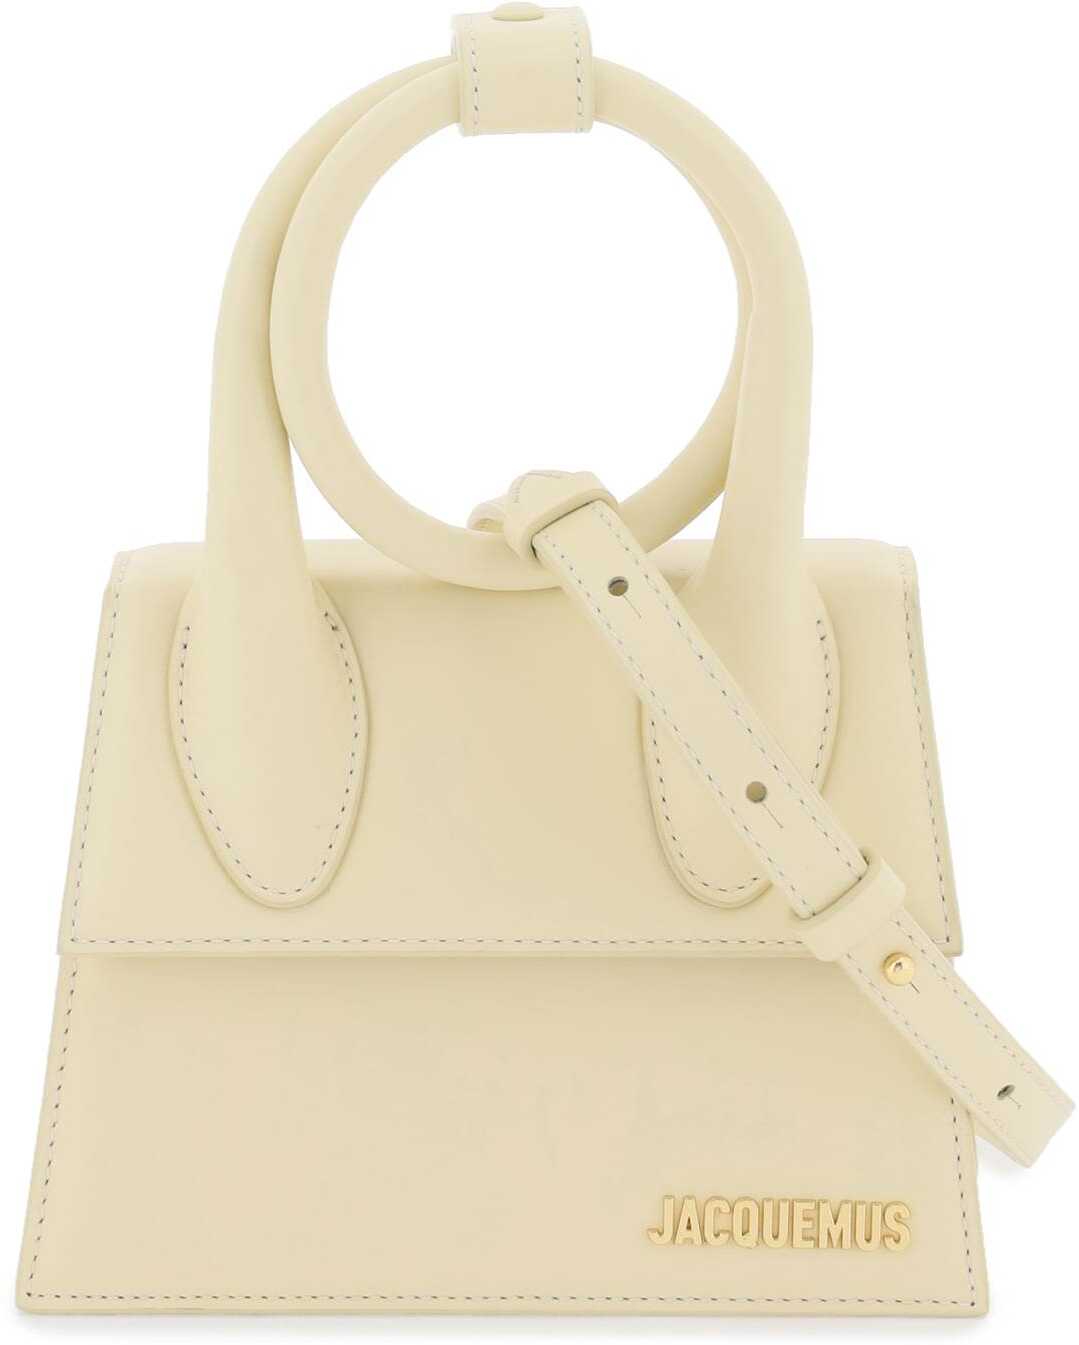 JACQUEMUS Le Chiquito Noeud Bag IVORY